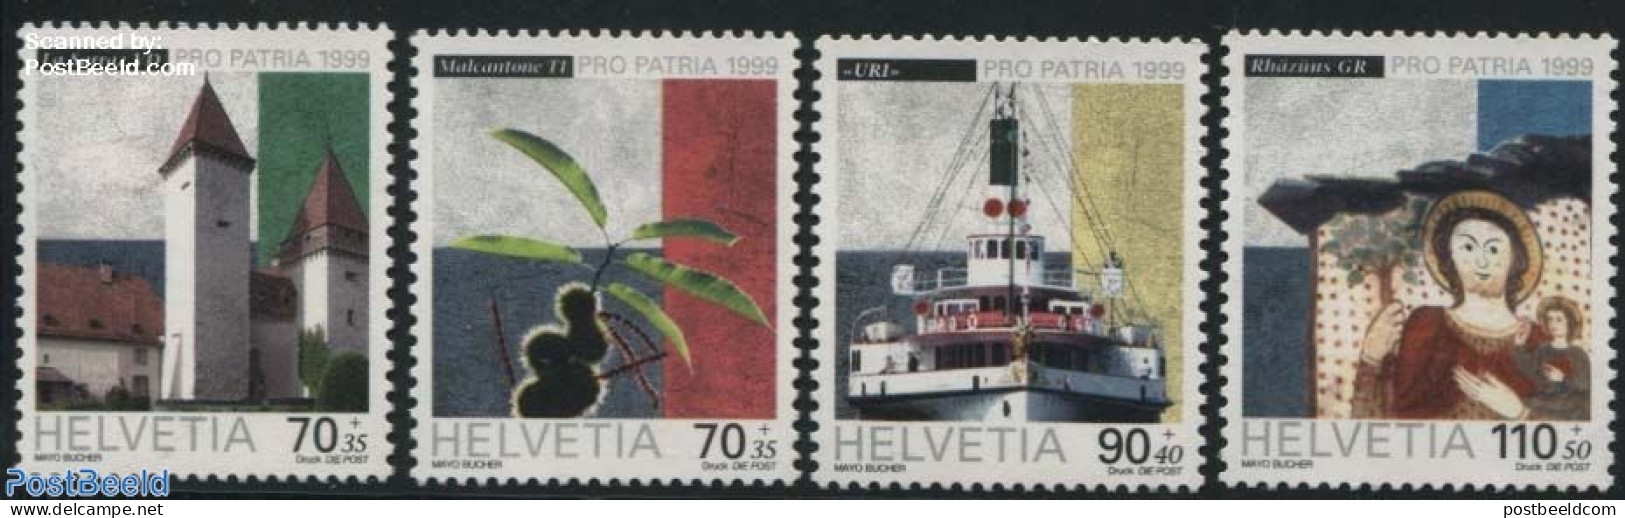 Switzerland 1999 Pro Patria 4v, Mint NH, Transport - Ships And Boats - Art - Castles & Fortifications - Unused Stamps